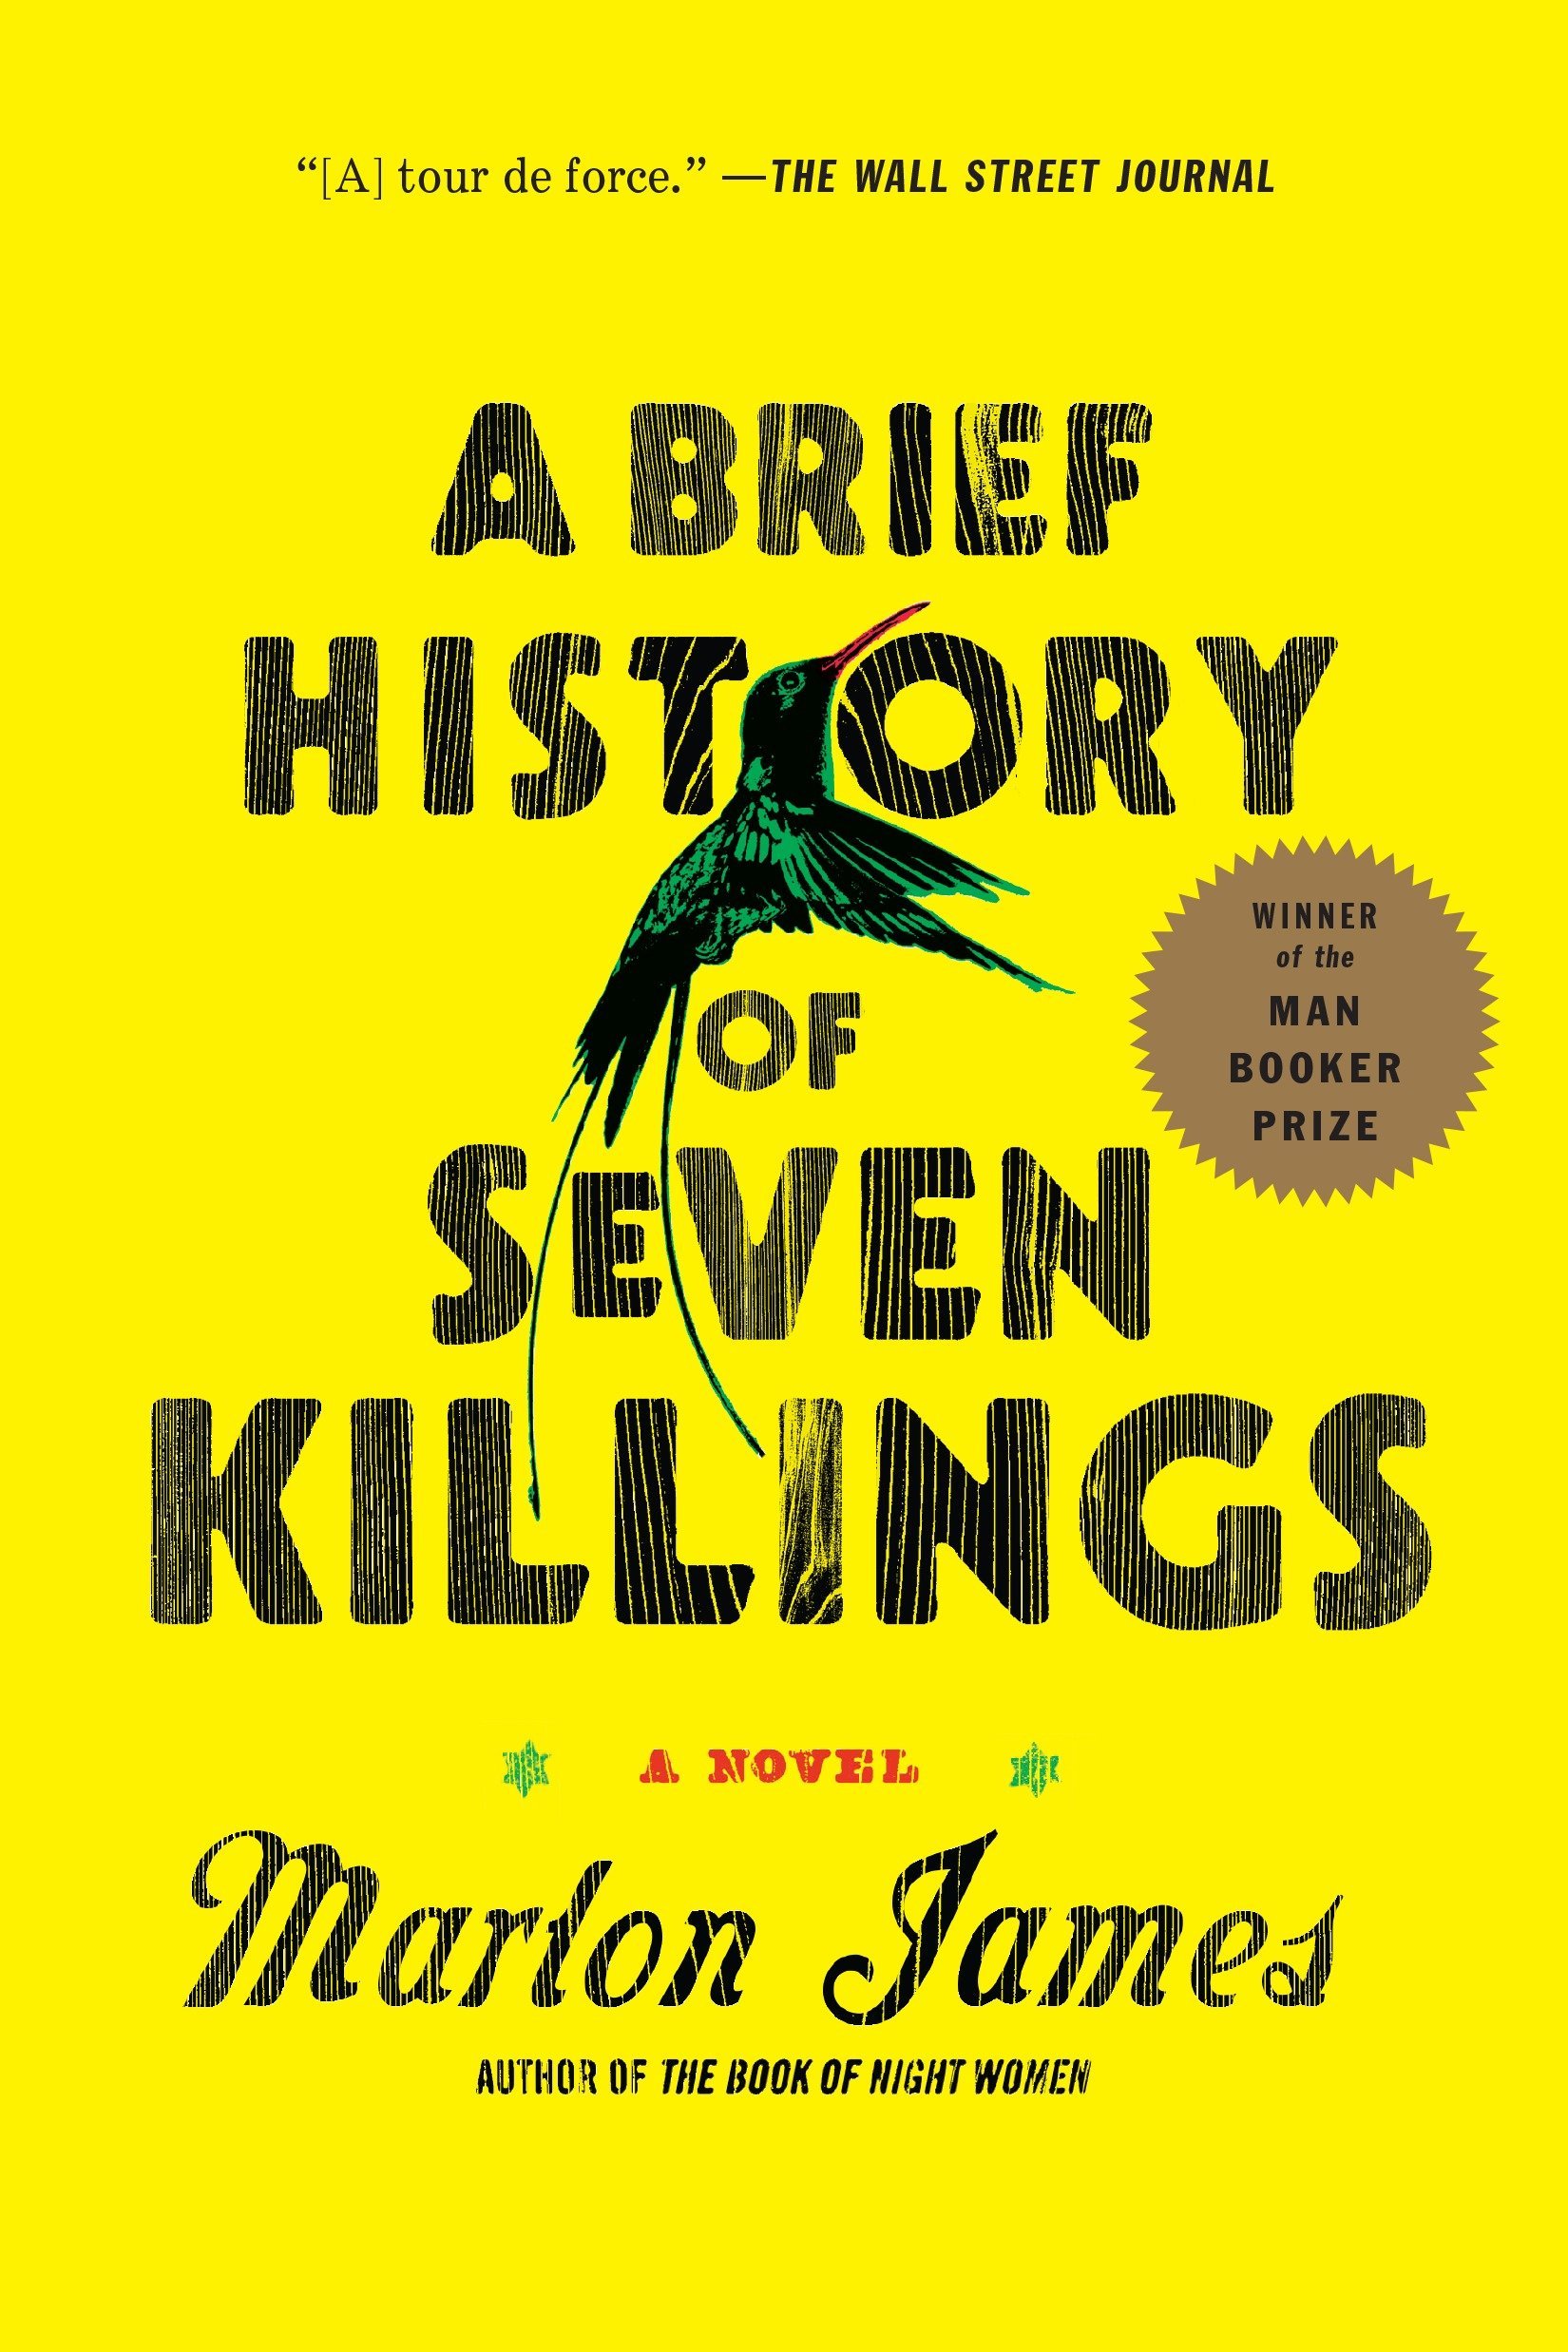 The image is the cover of the novel "a brief history of seven killings" by marlon james, which is adorned with praise from the wall street journal and a label indicating it is the winner of the man booker prize. the visual design features bold, capitalised text with a stylized, abstract palm tree in the background.